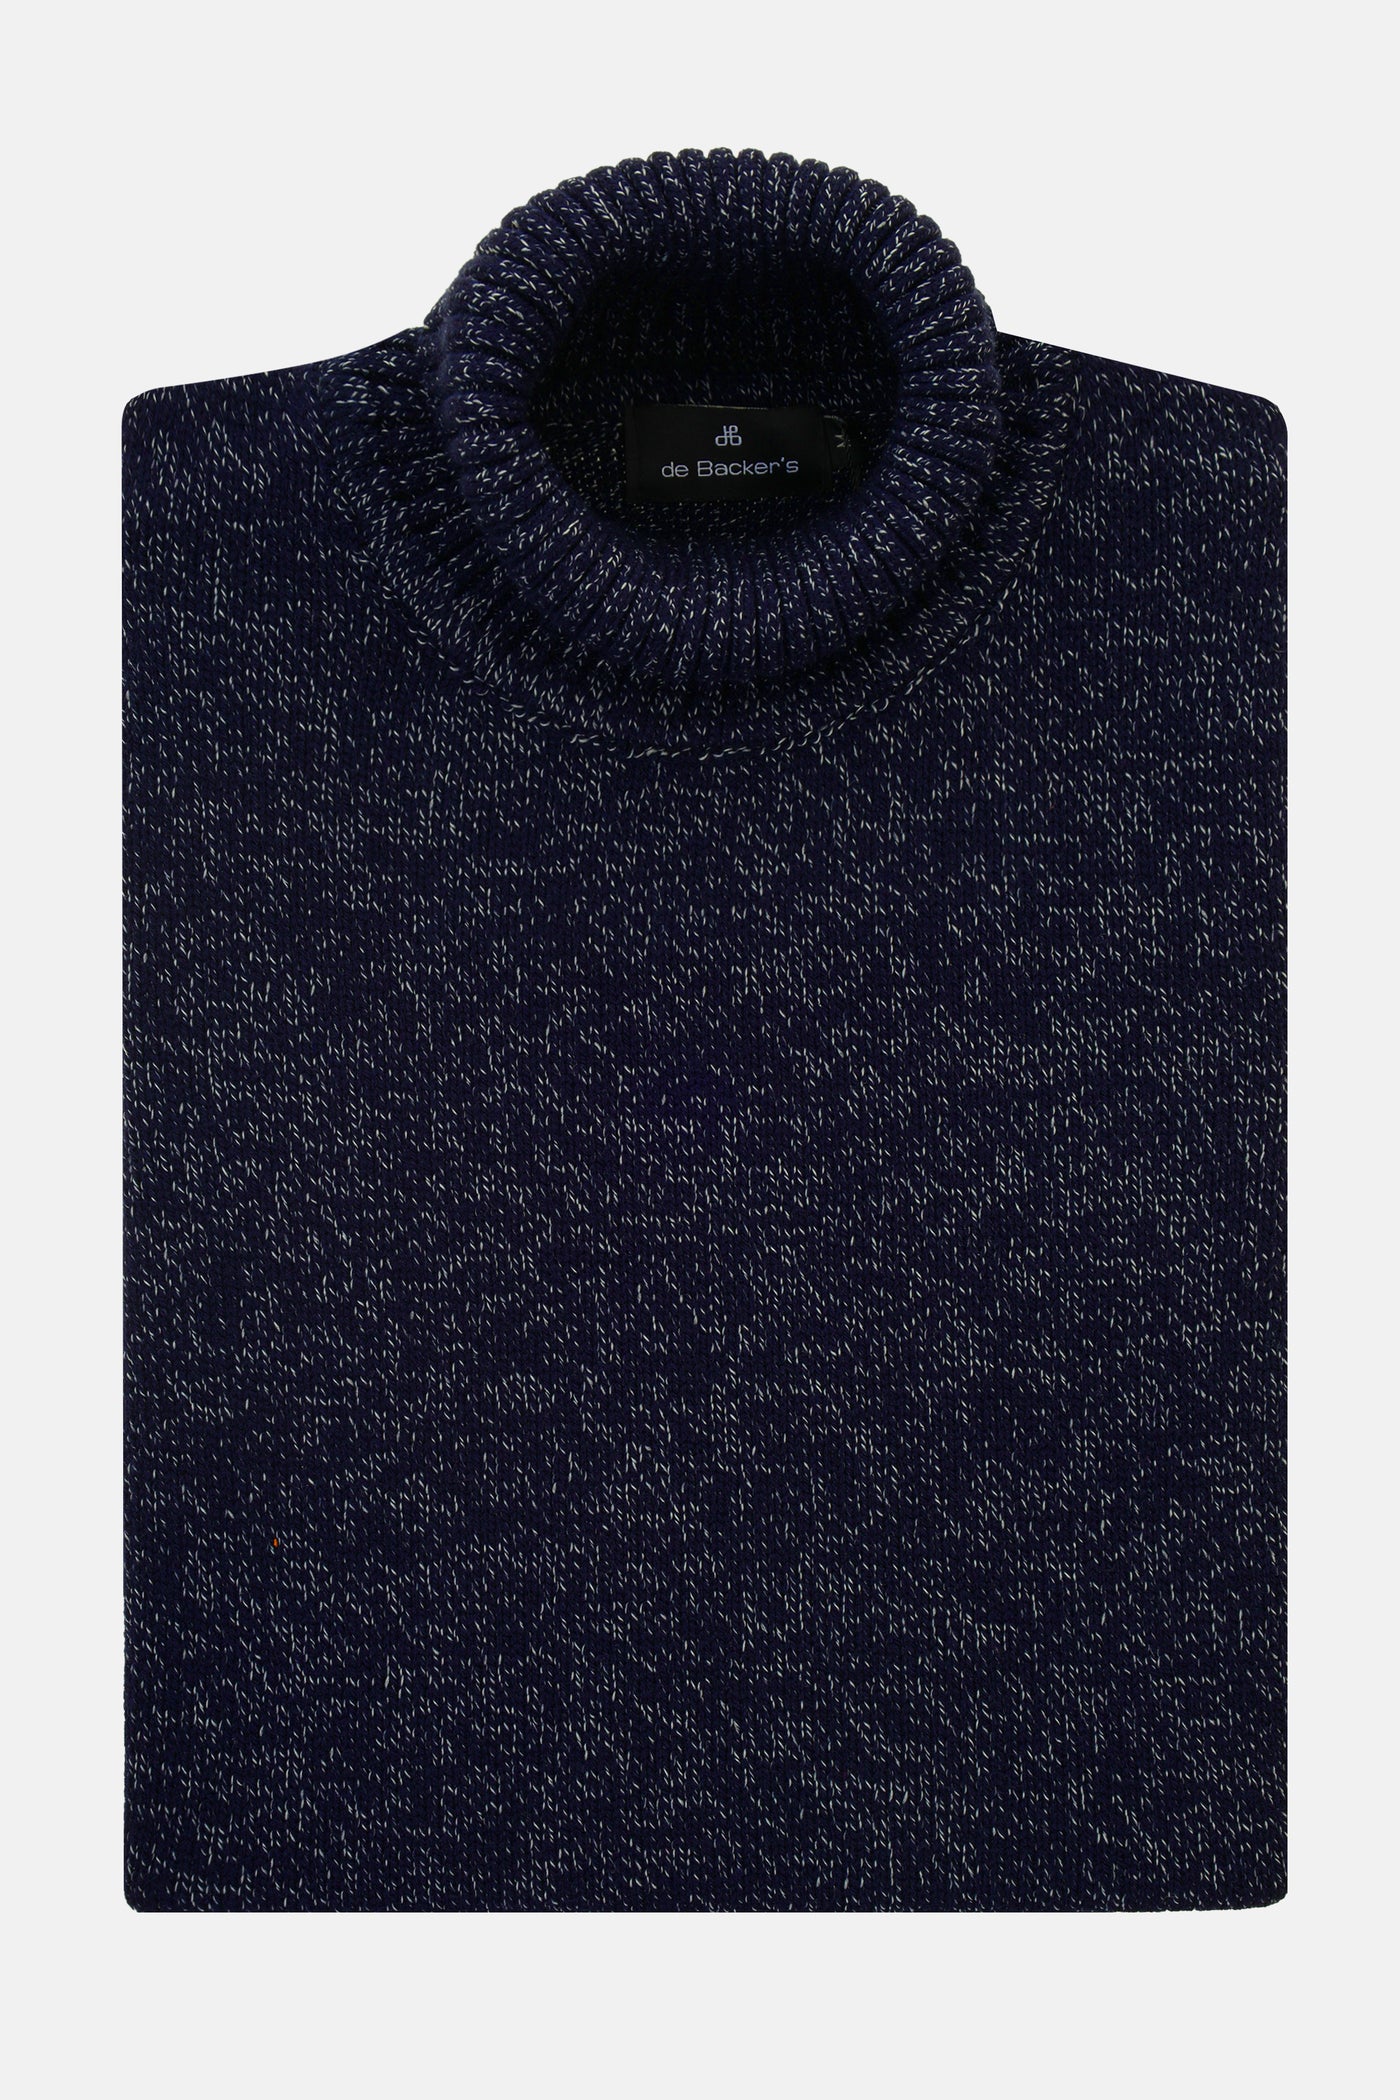 Jacquard Knitted Heavy Midnight Blue High-neck  Pullover